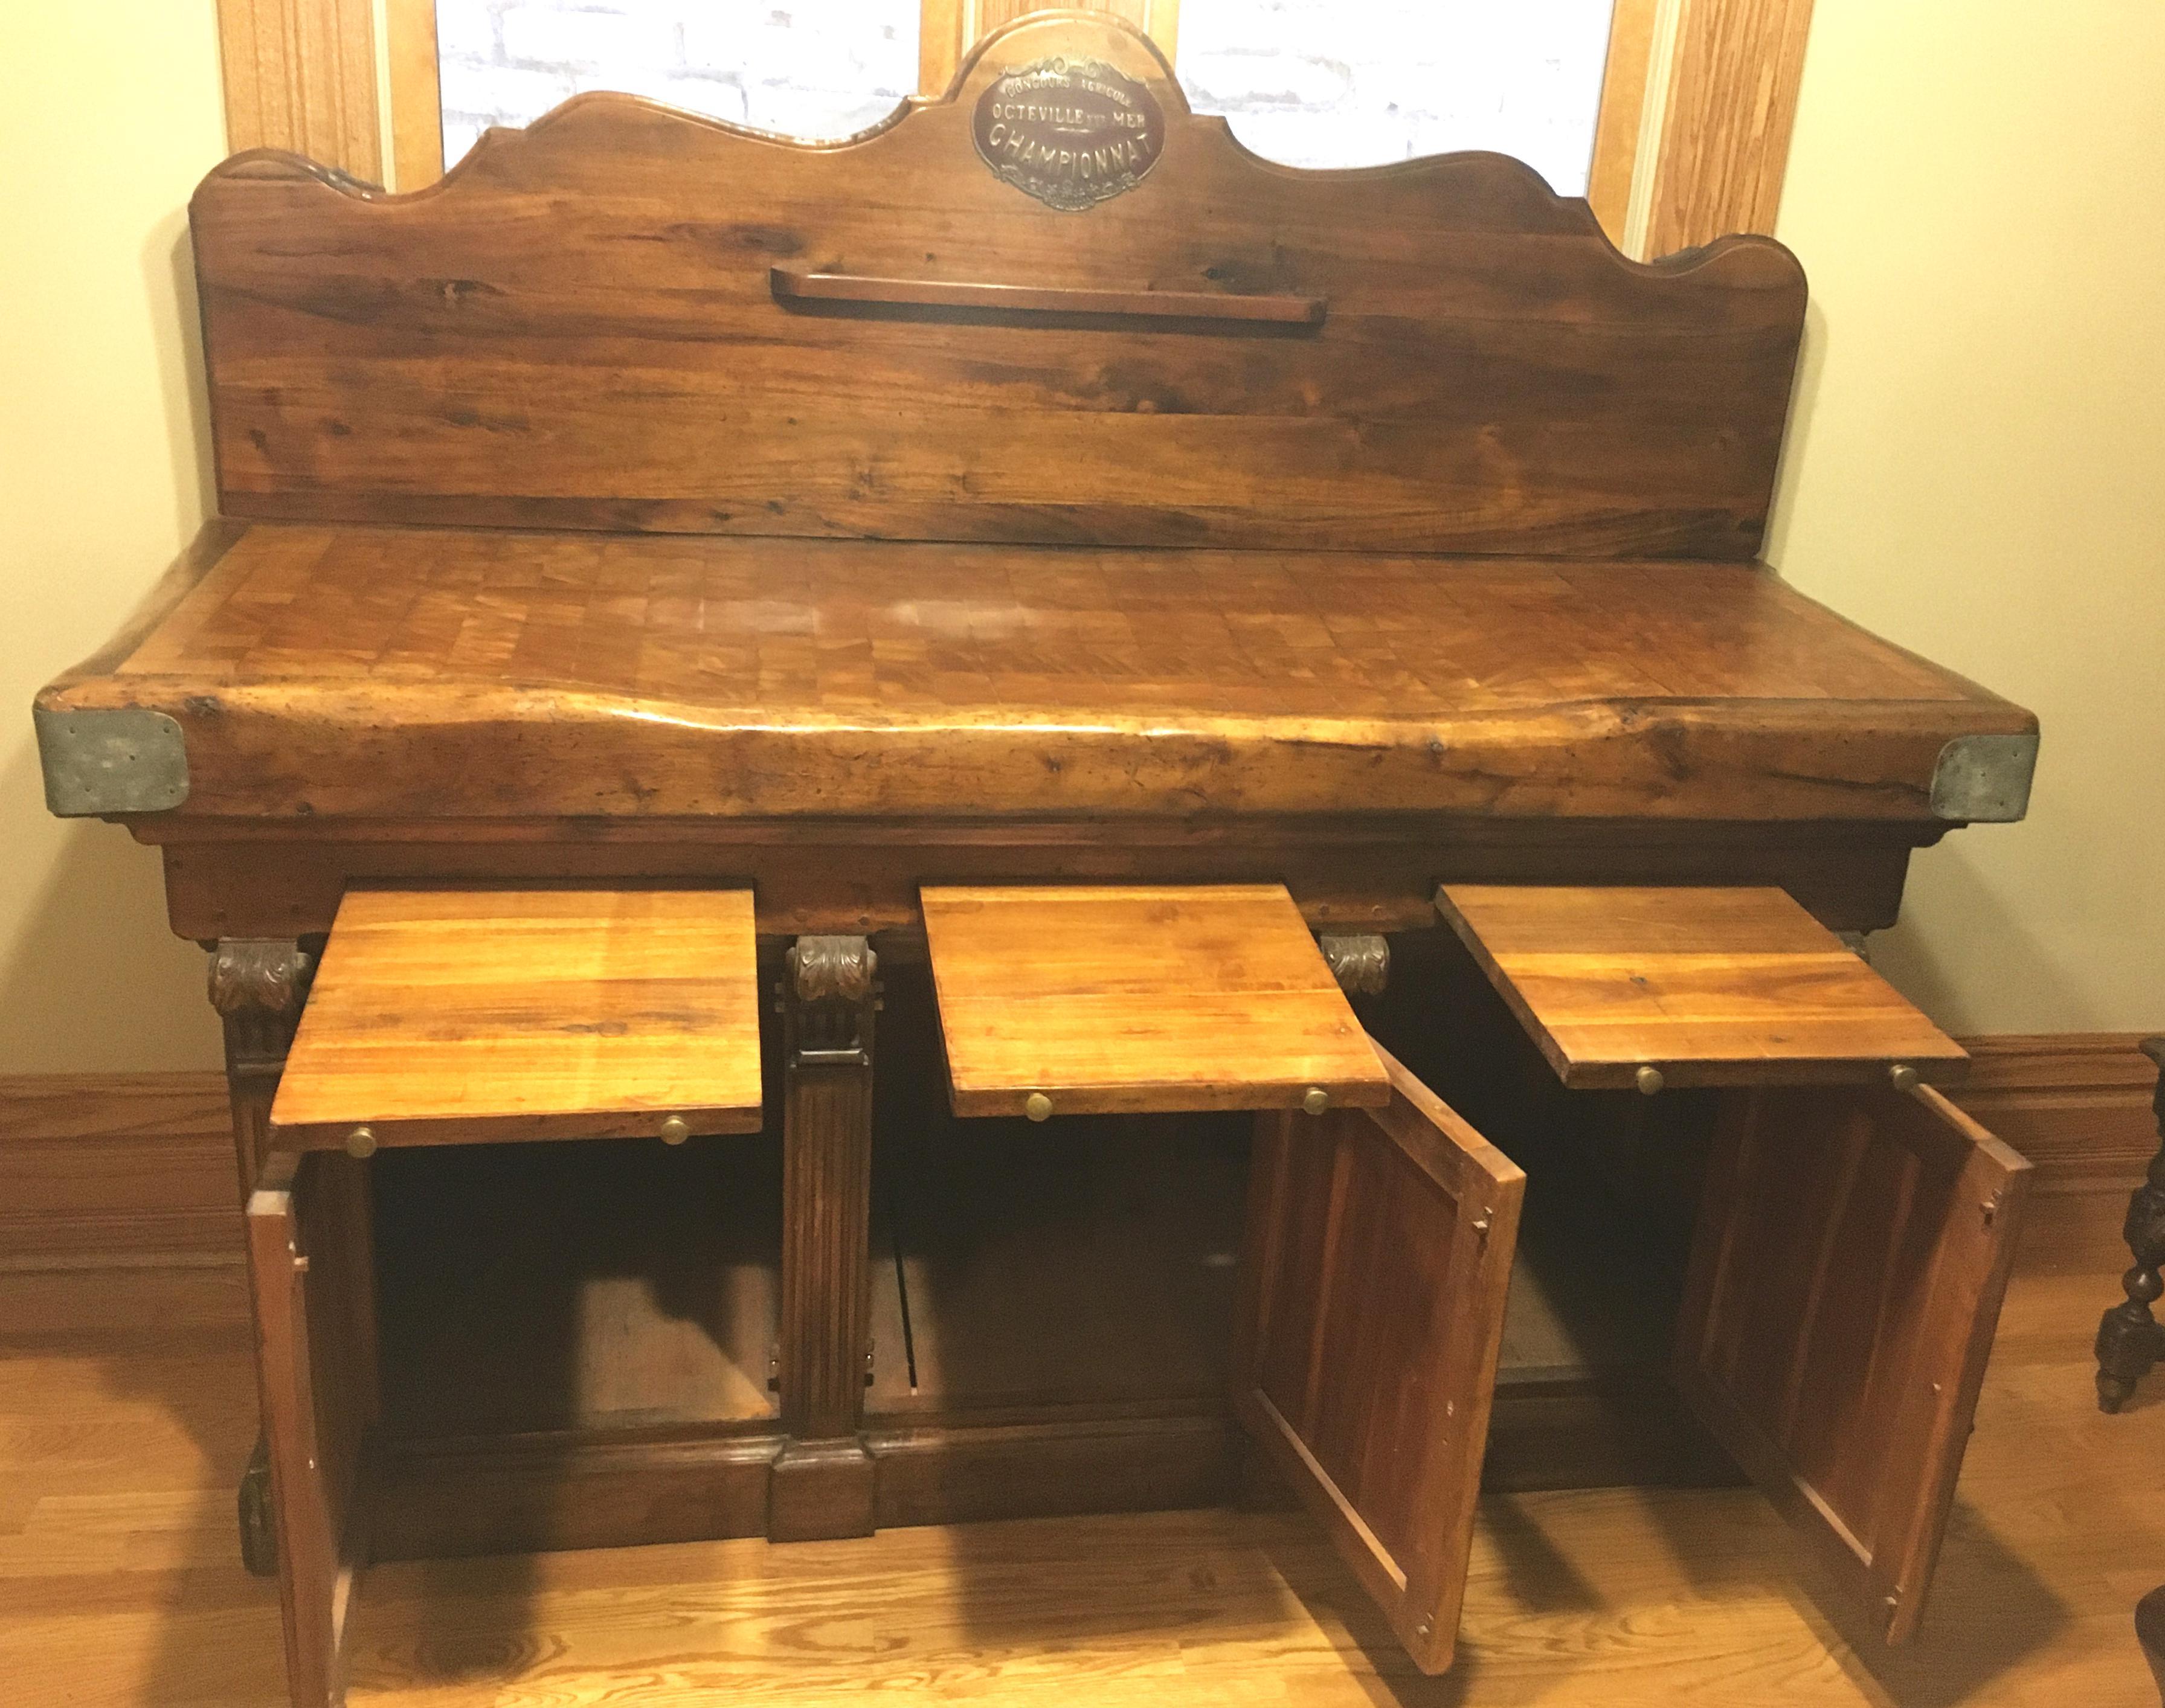 Reconditioned Antique French Butcher's Block with 3 pullout boards and 3 cupboards. Quality timber with recent work on bench to enhance wood finish and protect. Perfect piece for a kitchen to provide a French regional touch.
Functional piece that is